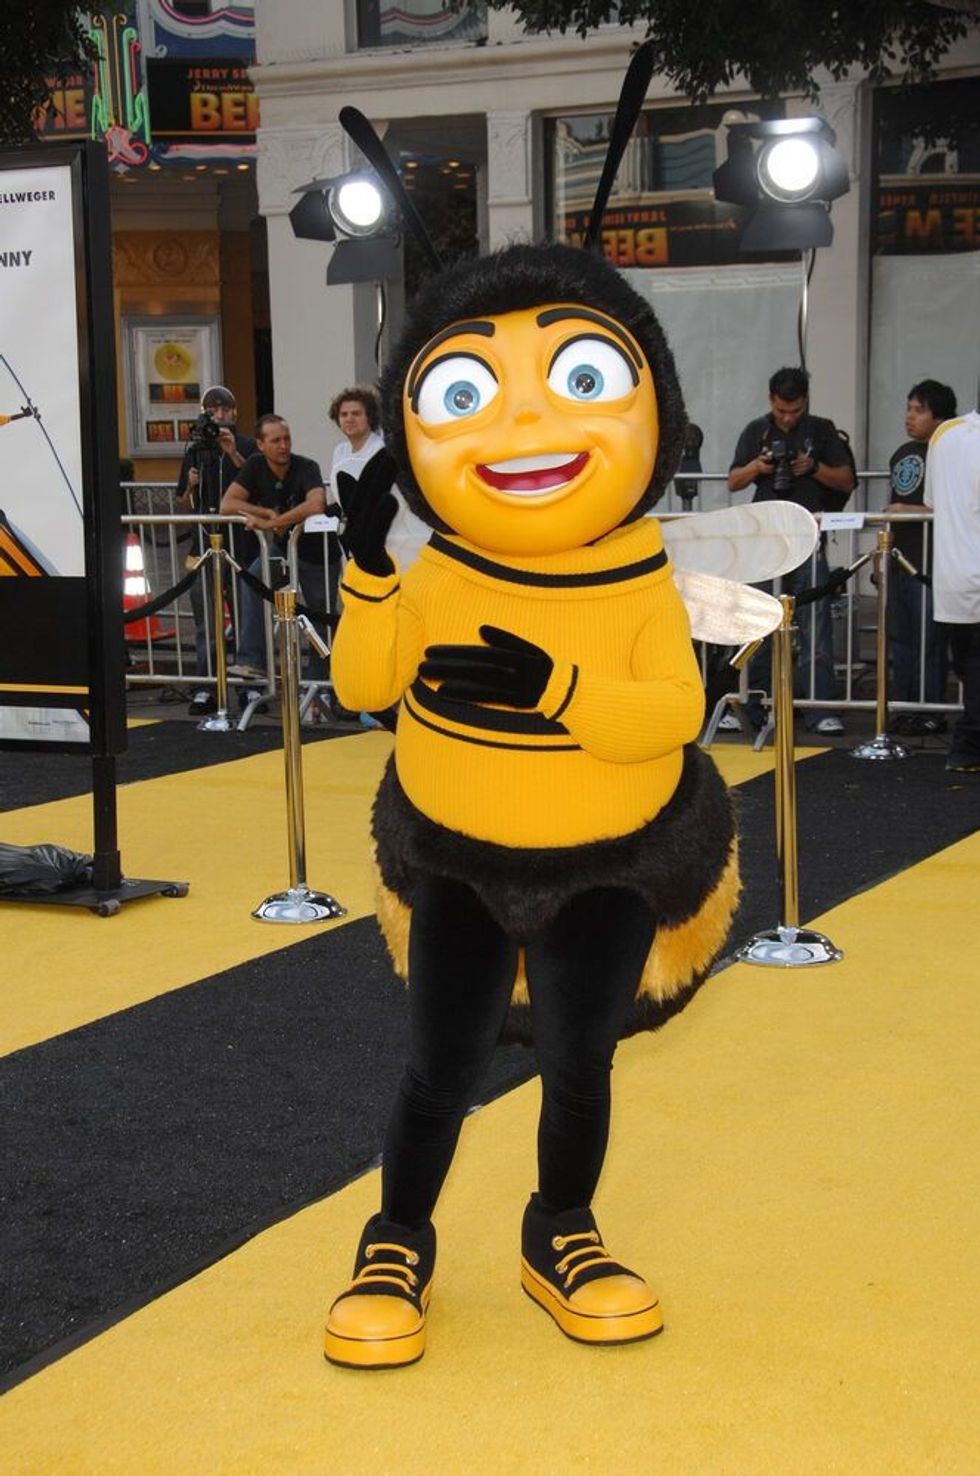 Person wearing costume of a character from the bee movie